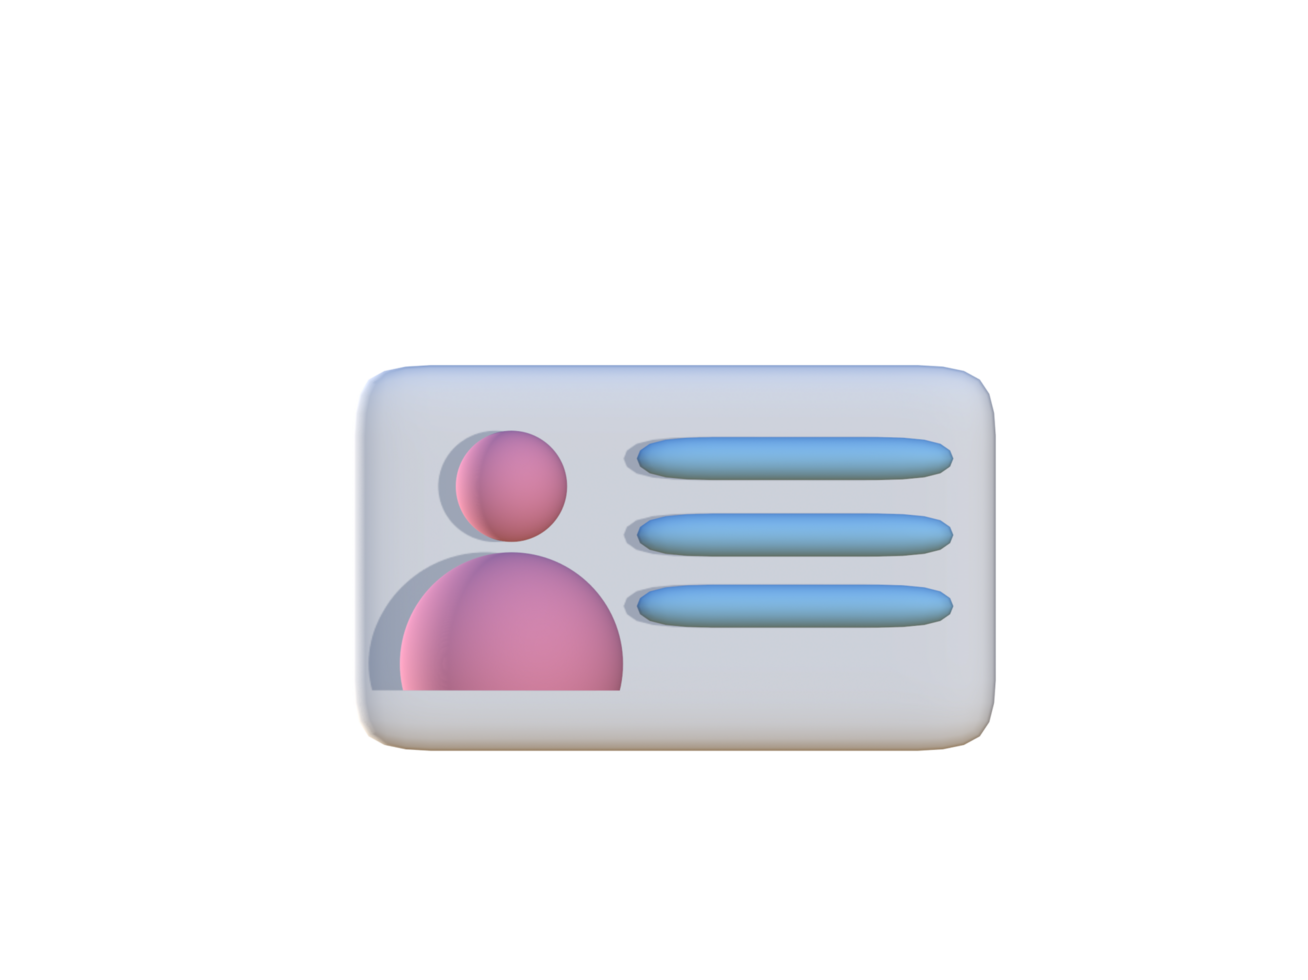 Simple 3D artwork from an ID card with a landscape view png